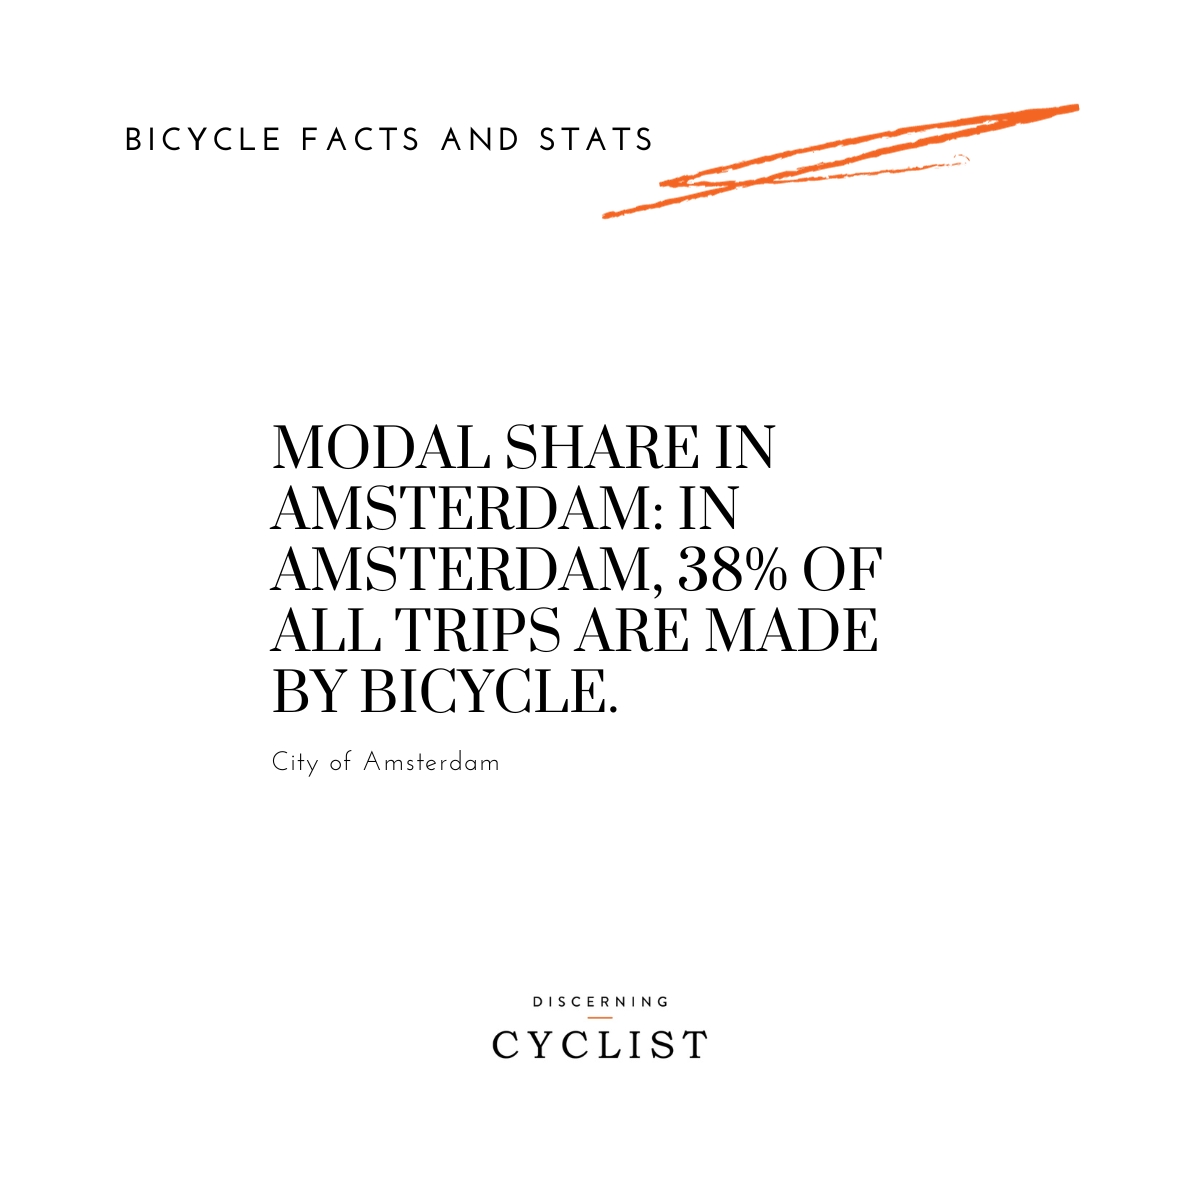 Modal Share in Amsterdam: In Amsterdam, 38% of all trips are made by bicycle.